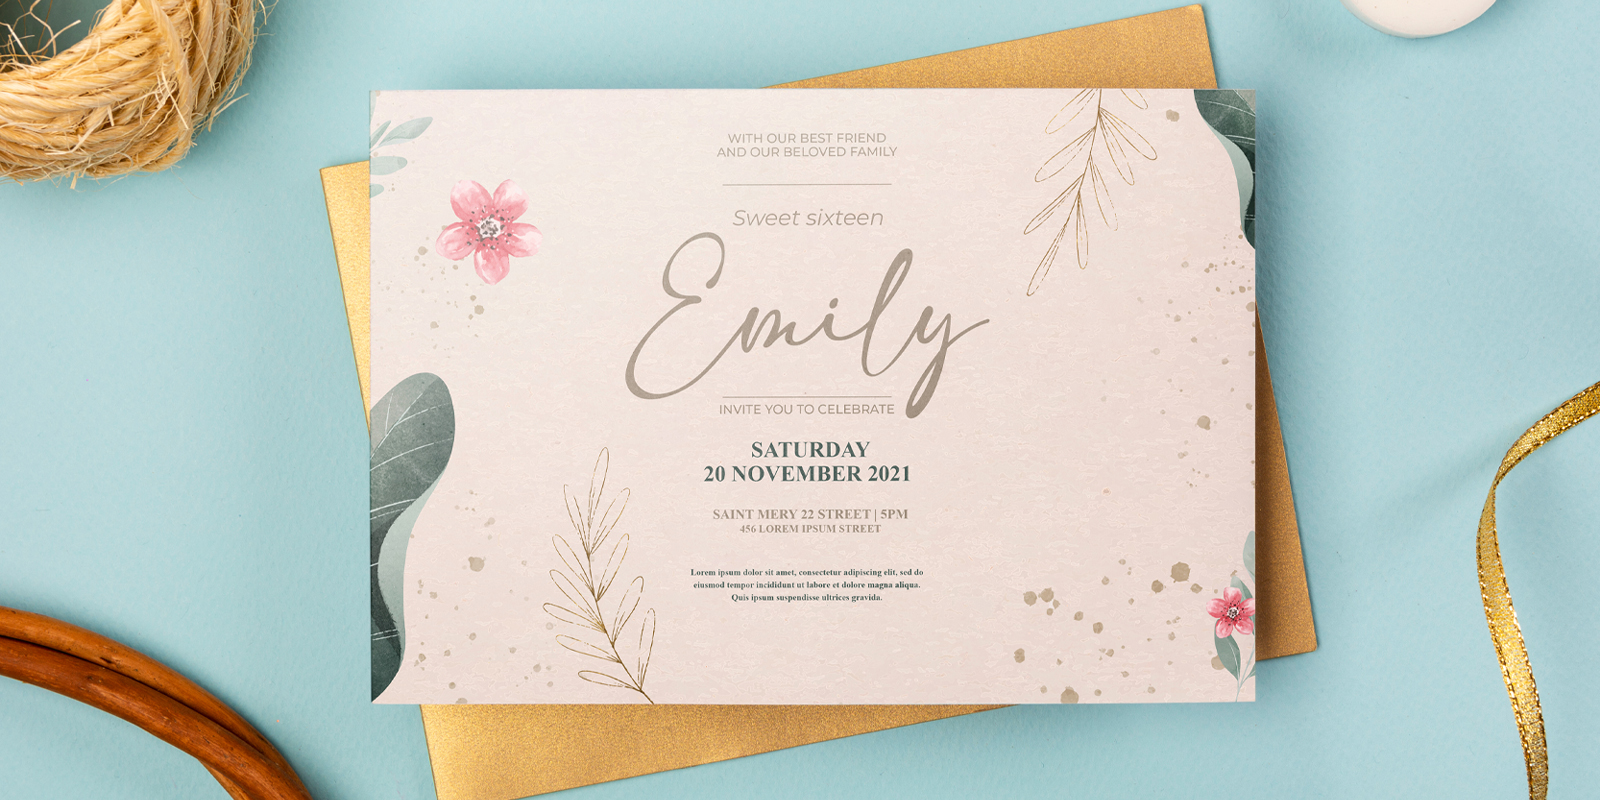 Invitations in Ballarat - Print with Pagerr